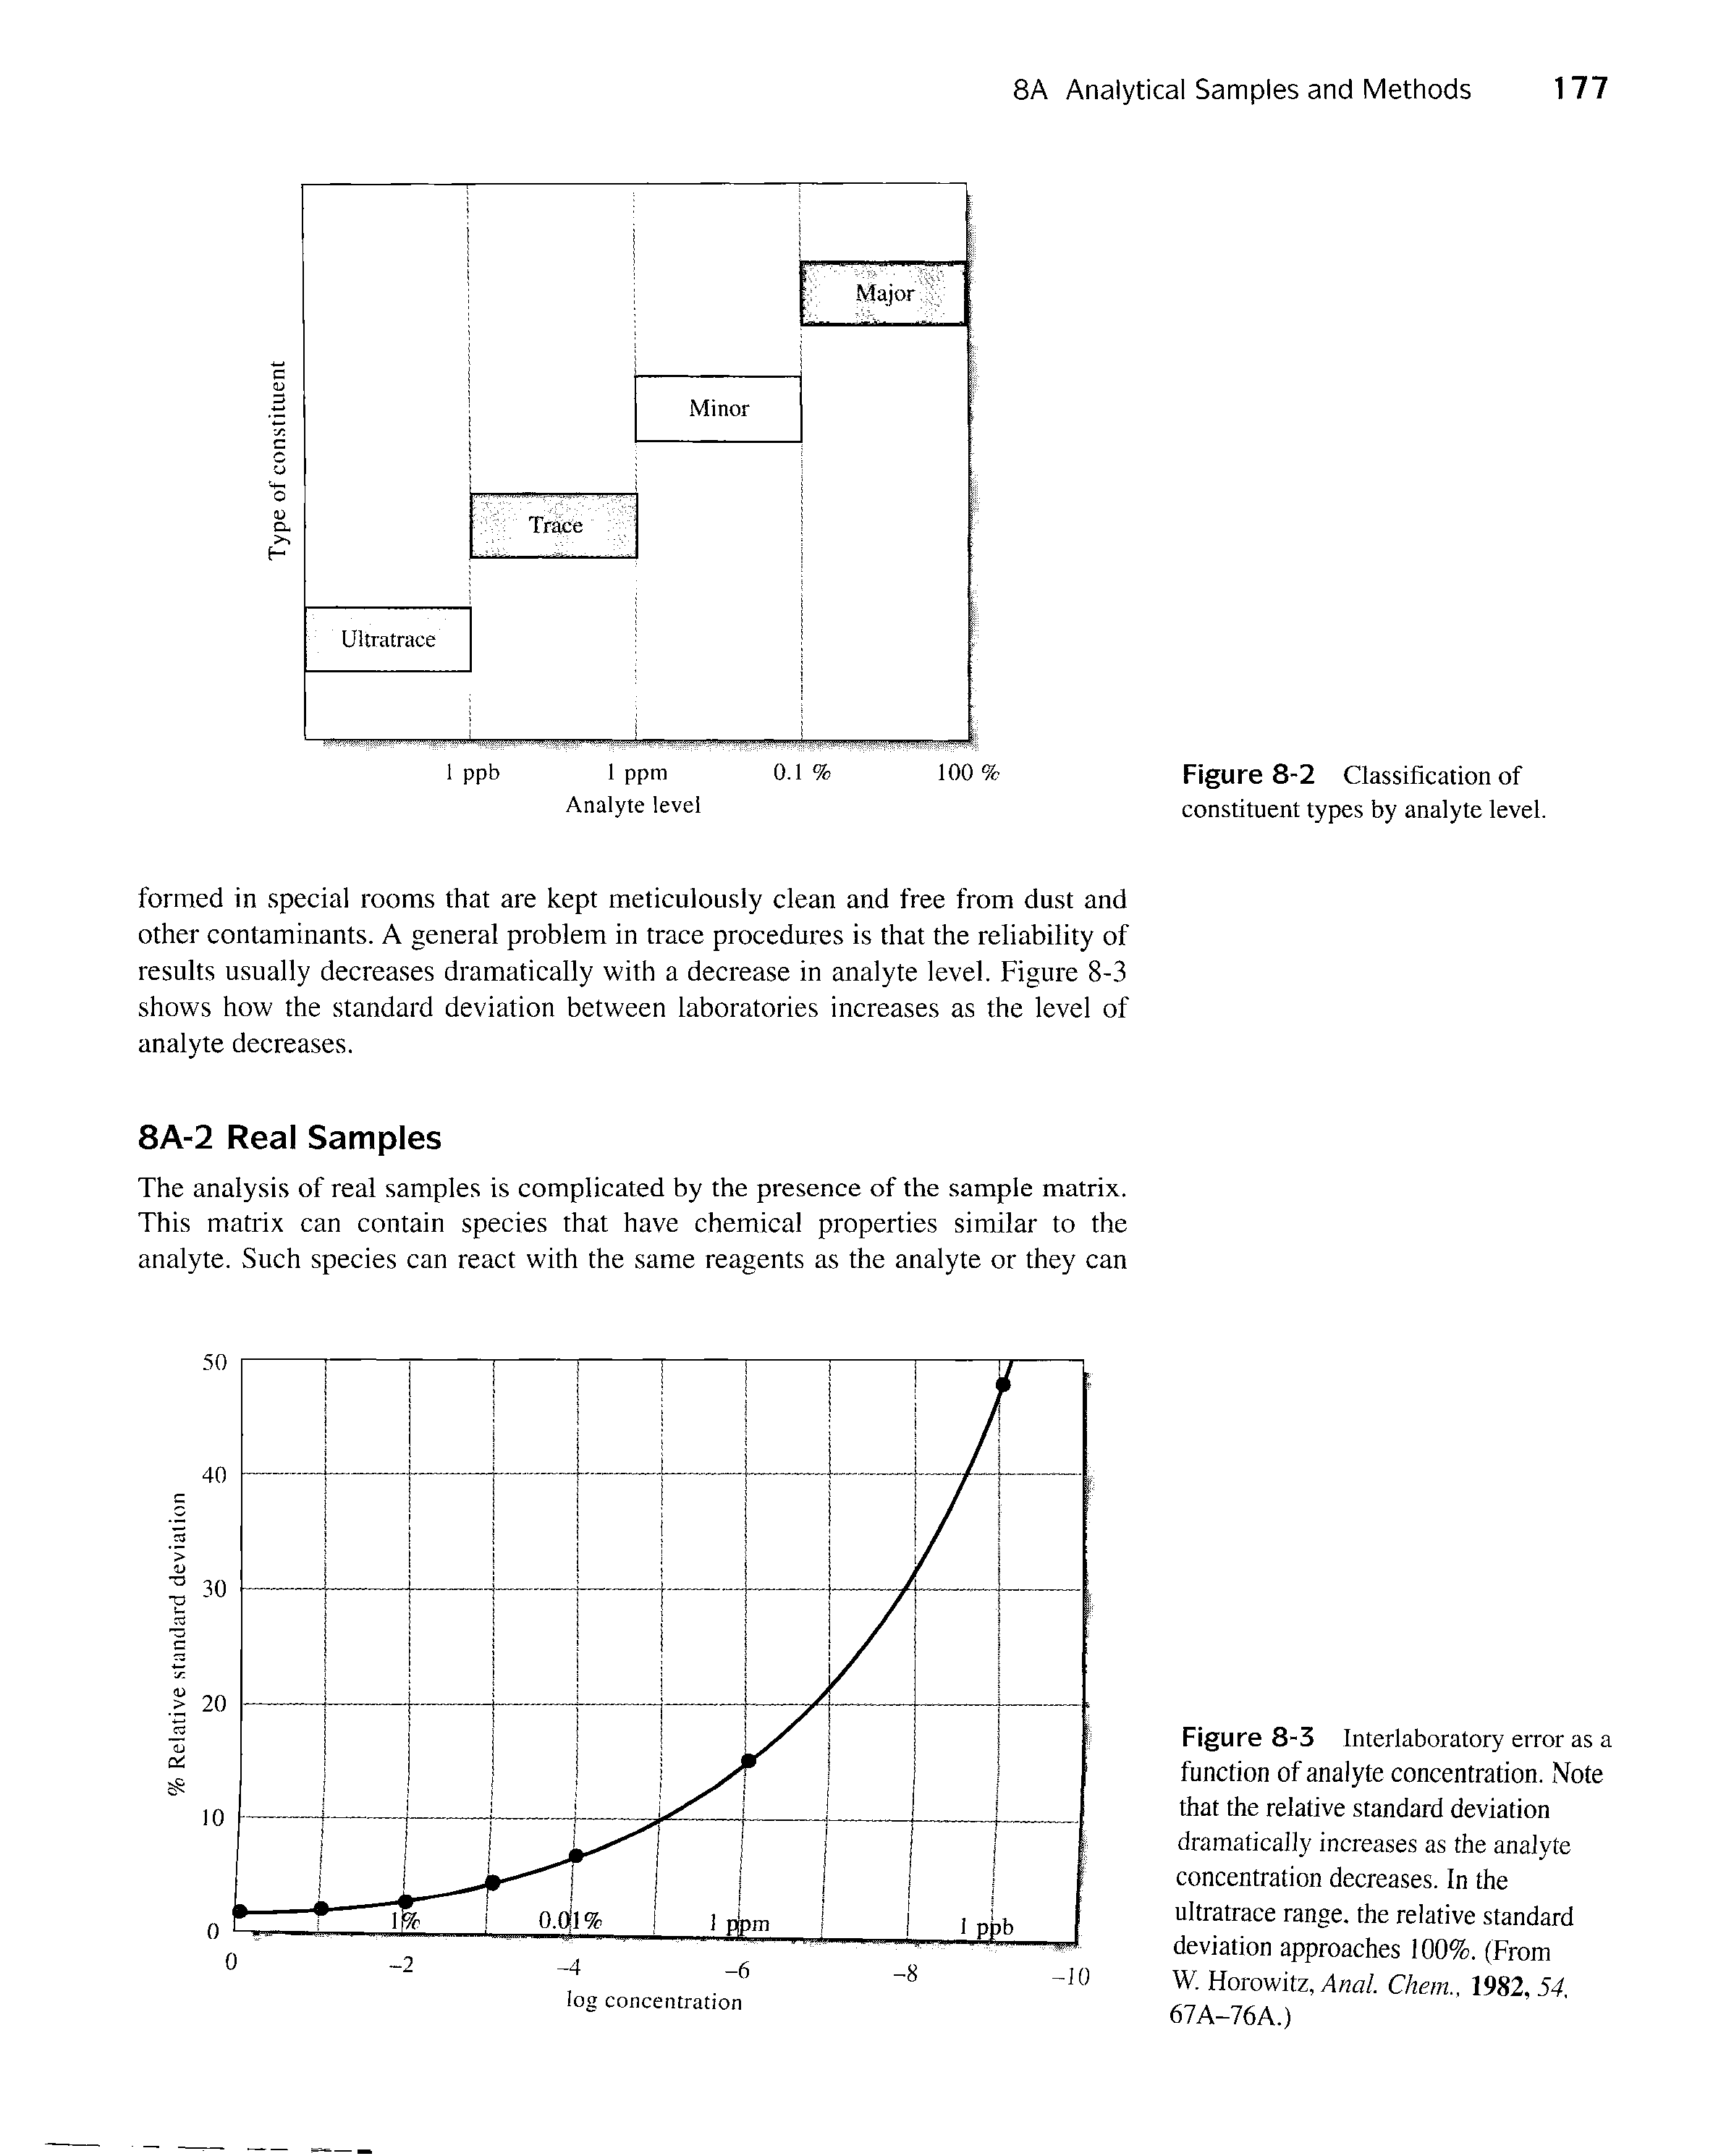 Figure 8-3 Interlaboratory error as a function of analyte concentration. Note that the relative standard deviation dramatically increases as the analyte concentration decreases. In the ultratrace range, the relative standard deviation approaches 100%. (From W. Horowitz, dna/. Chem.. 1982, 54. 67A-76A.)...